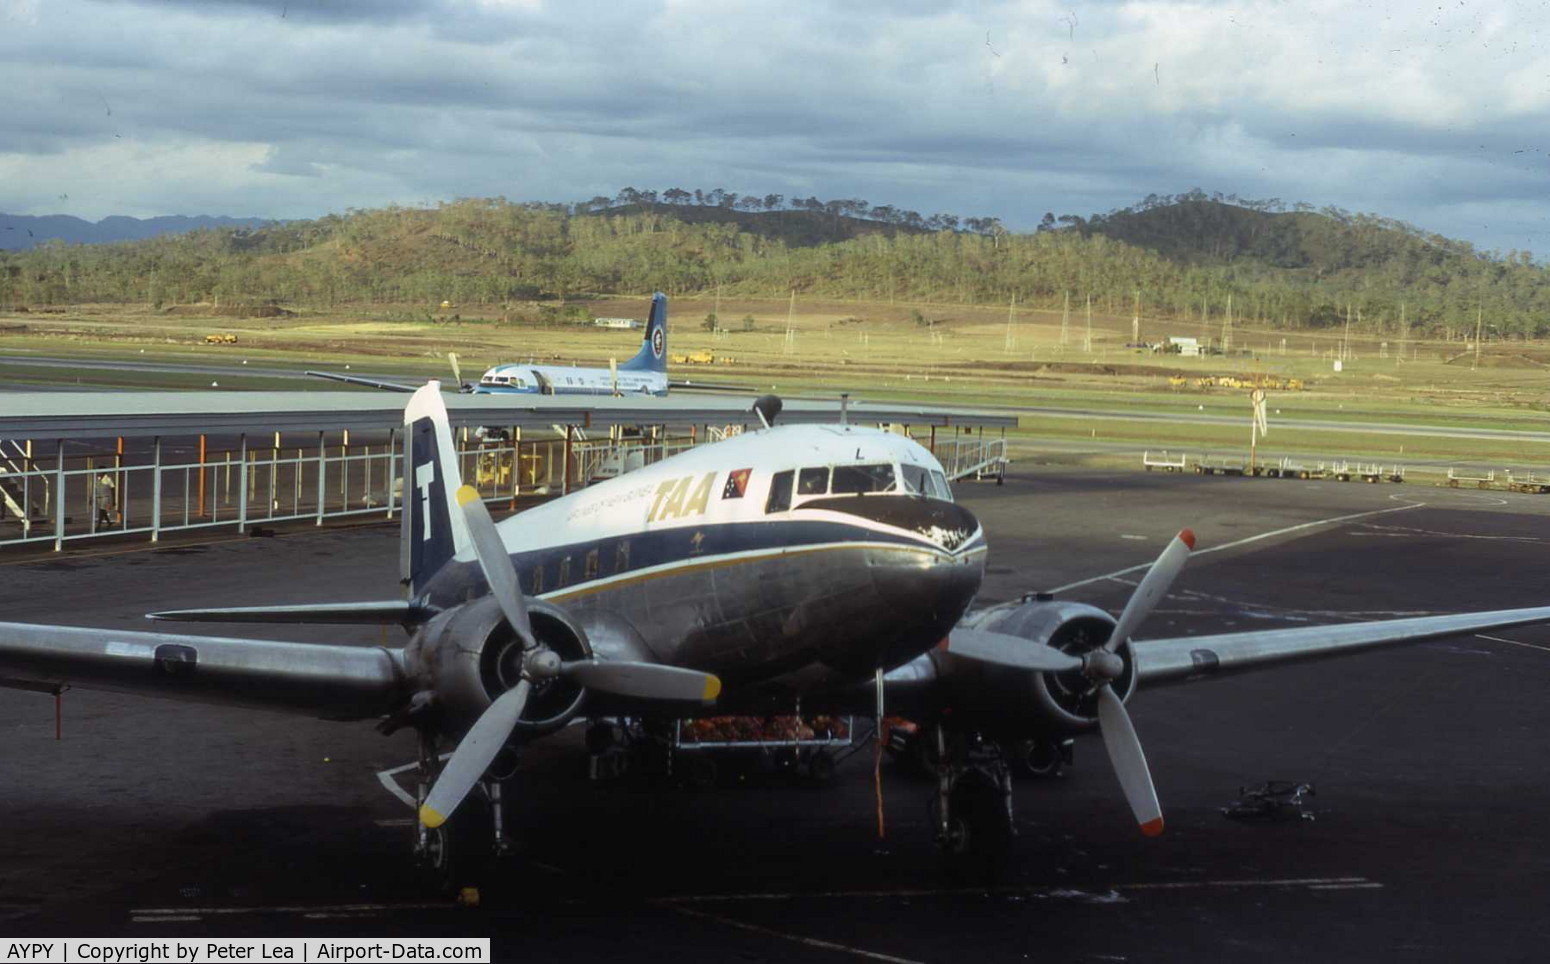 Port Moresby/Jackson International Airport, Port Moresby Papua New Guinea (AYPY) - TAA Airlines of New Guinea Douglas DC-3 at Port Moresby Airport in December 1974.